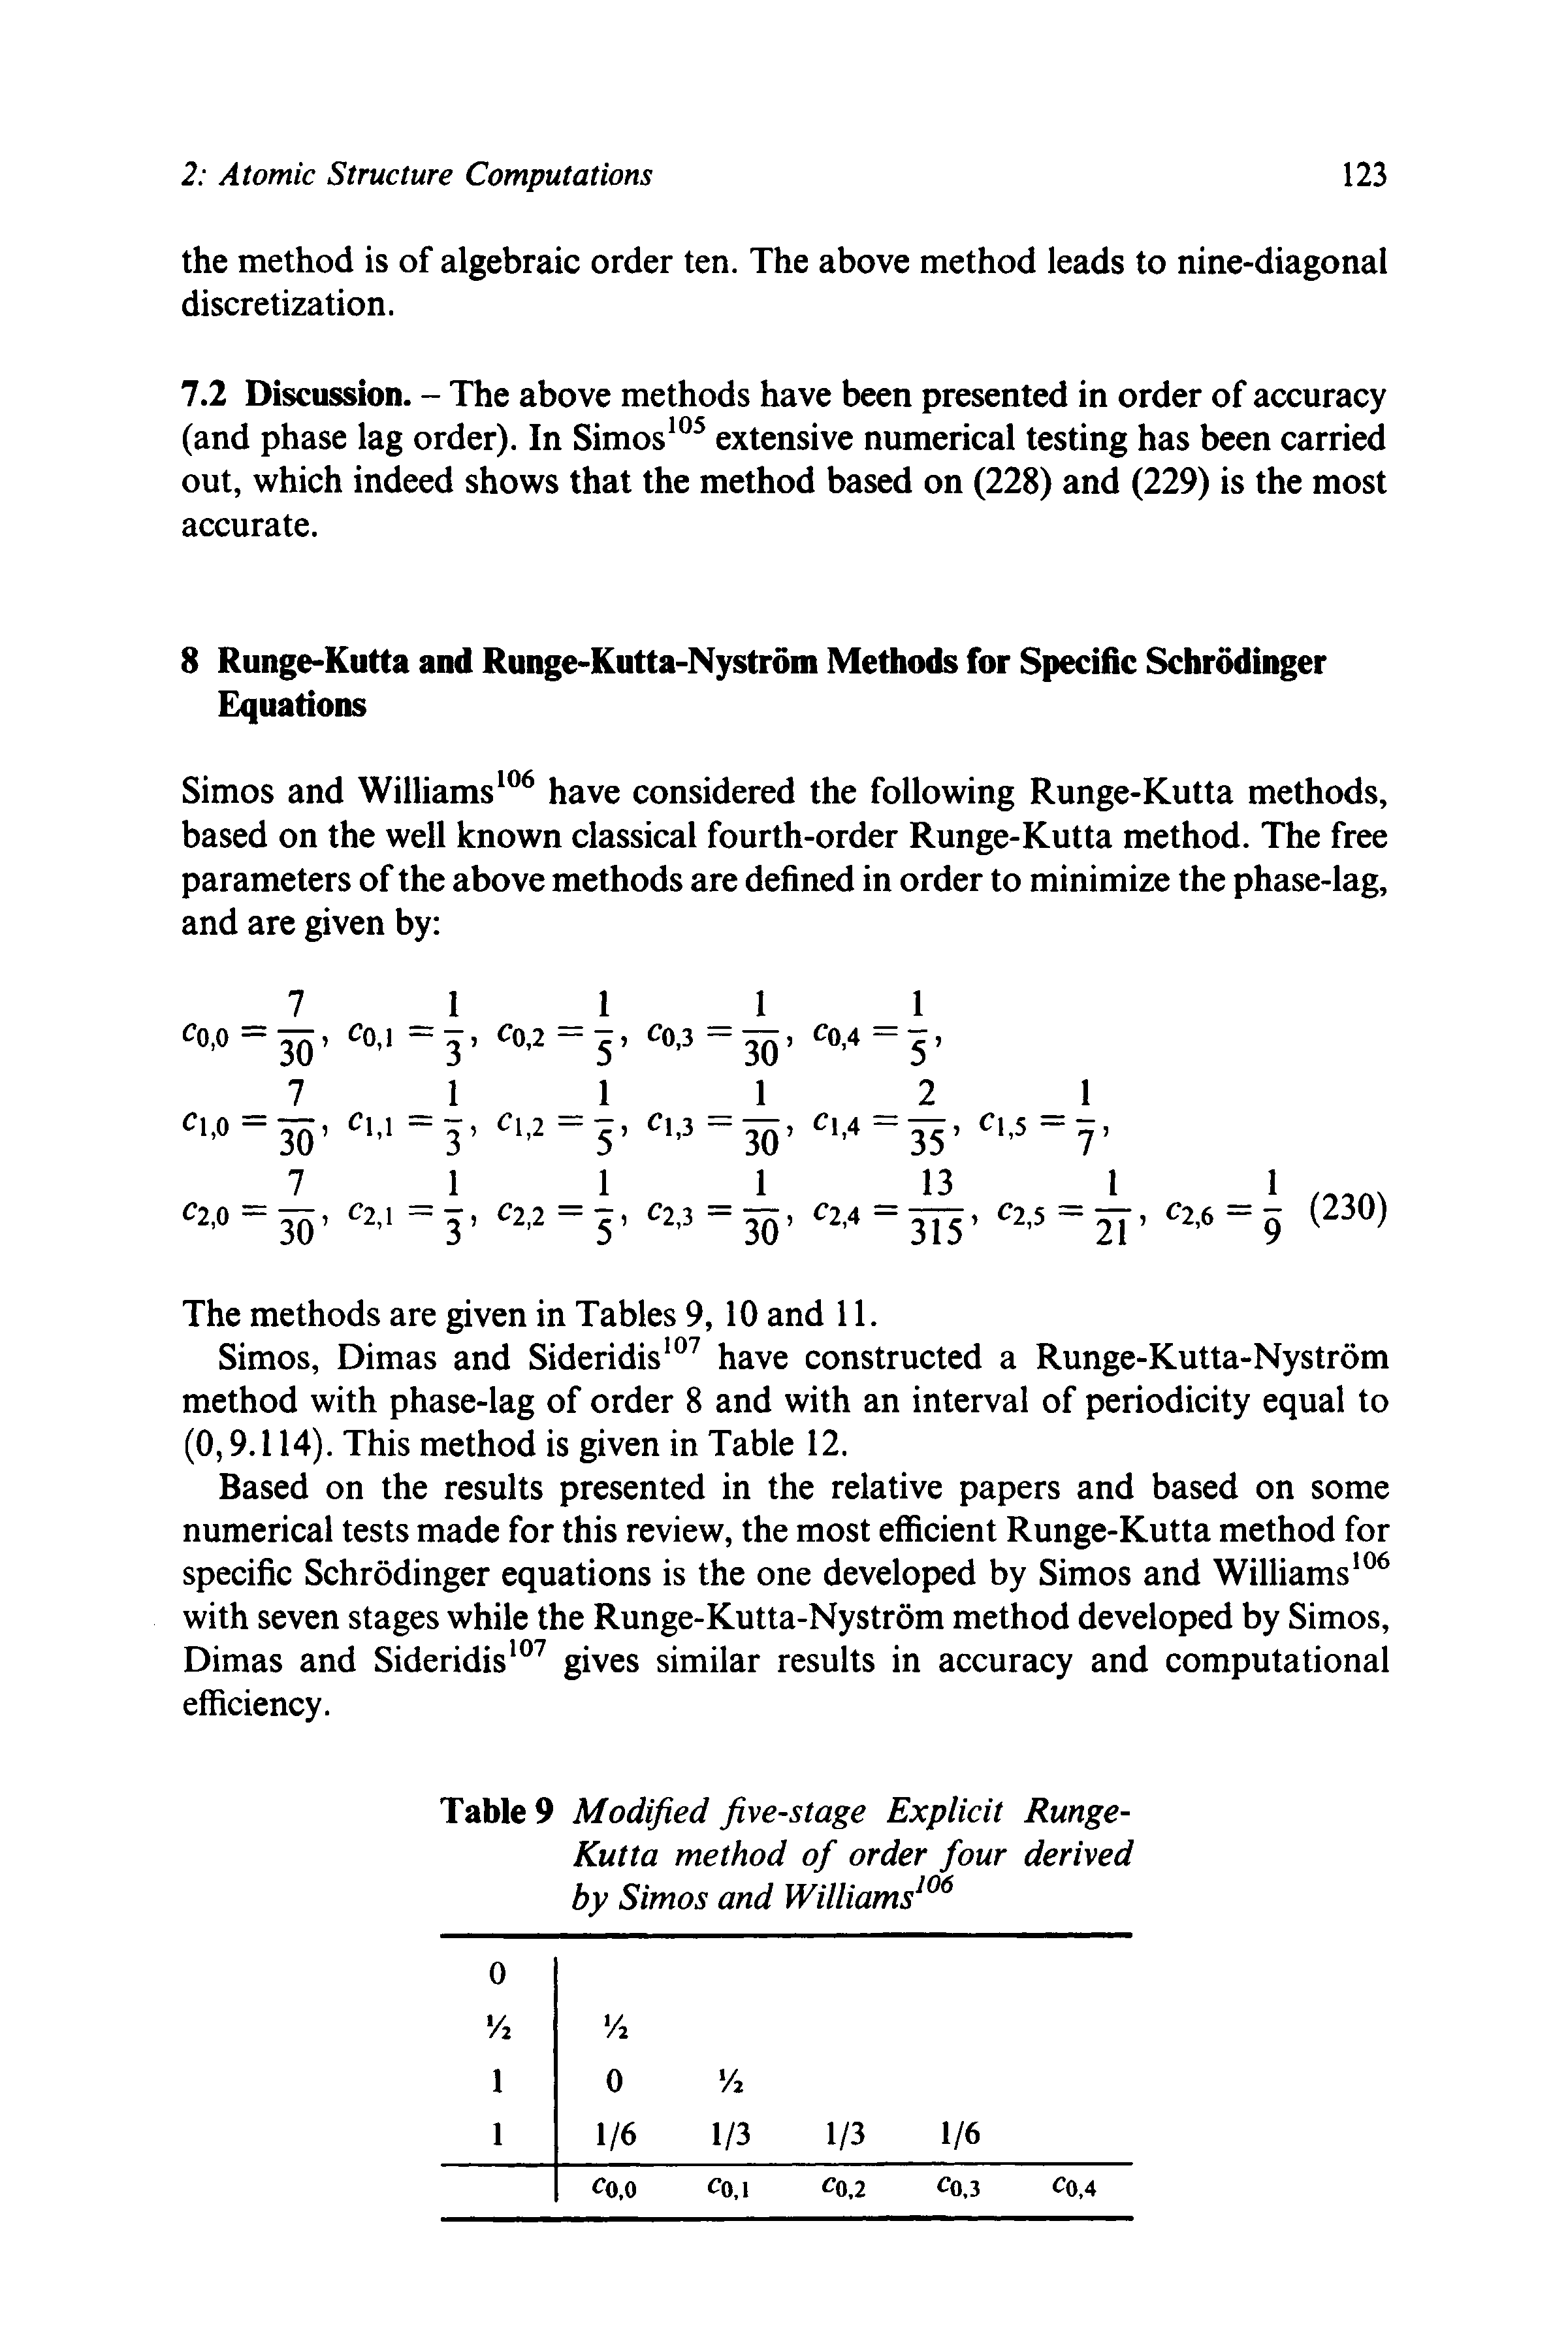 Table 9 Modified five-stage Explicit Runge-Kutta method of order four derived by Simos and Williams106 ...